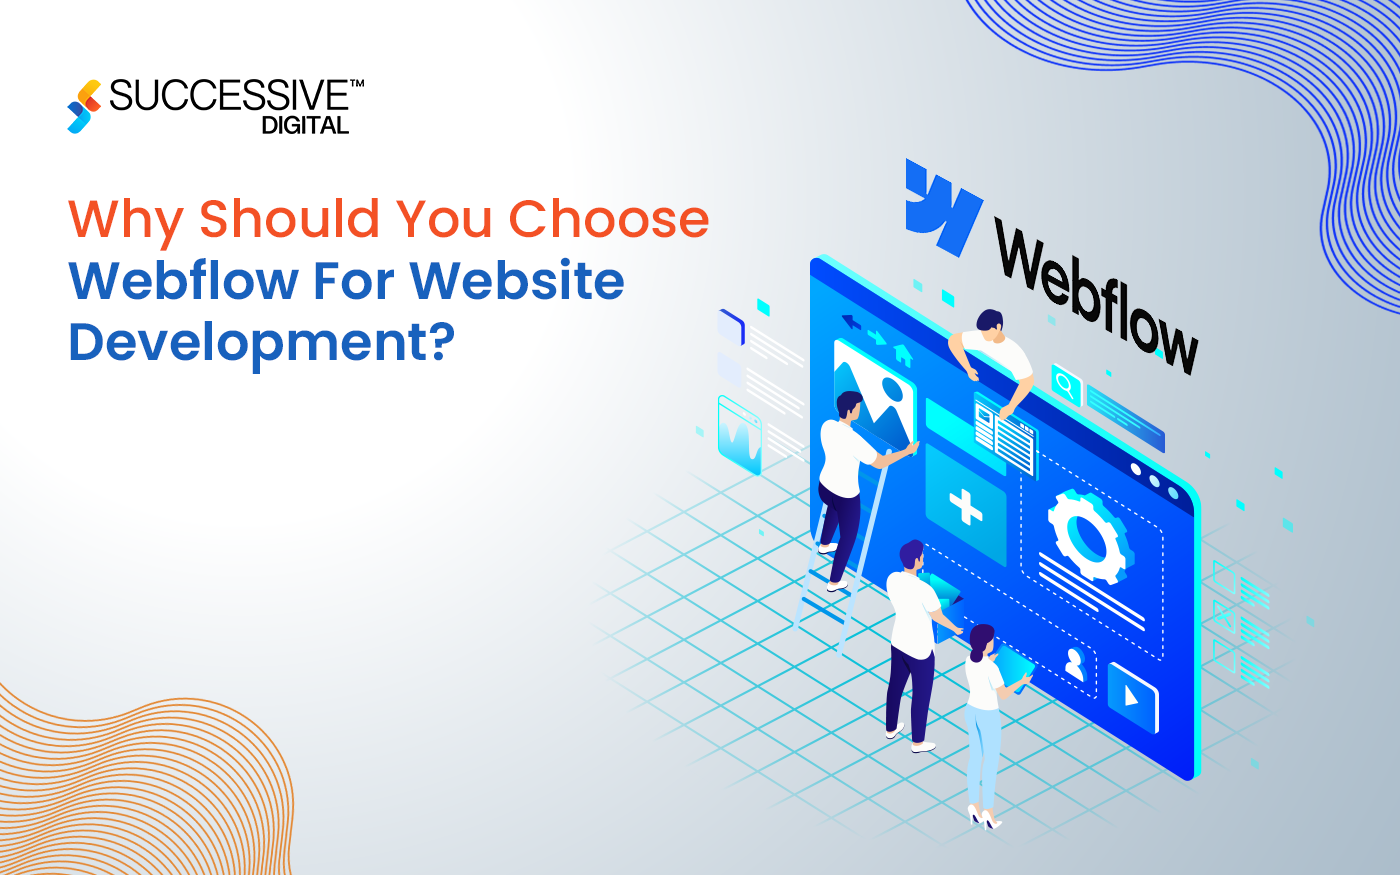 Why Should You Choose Webflow For Website Development?